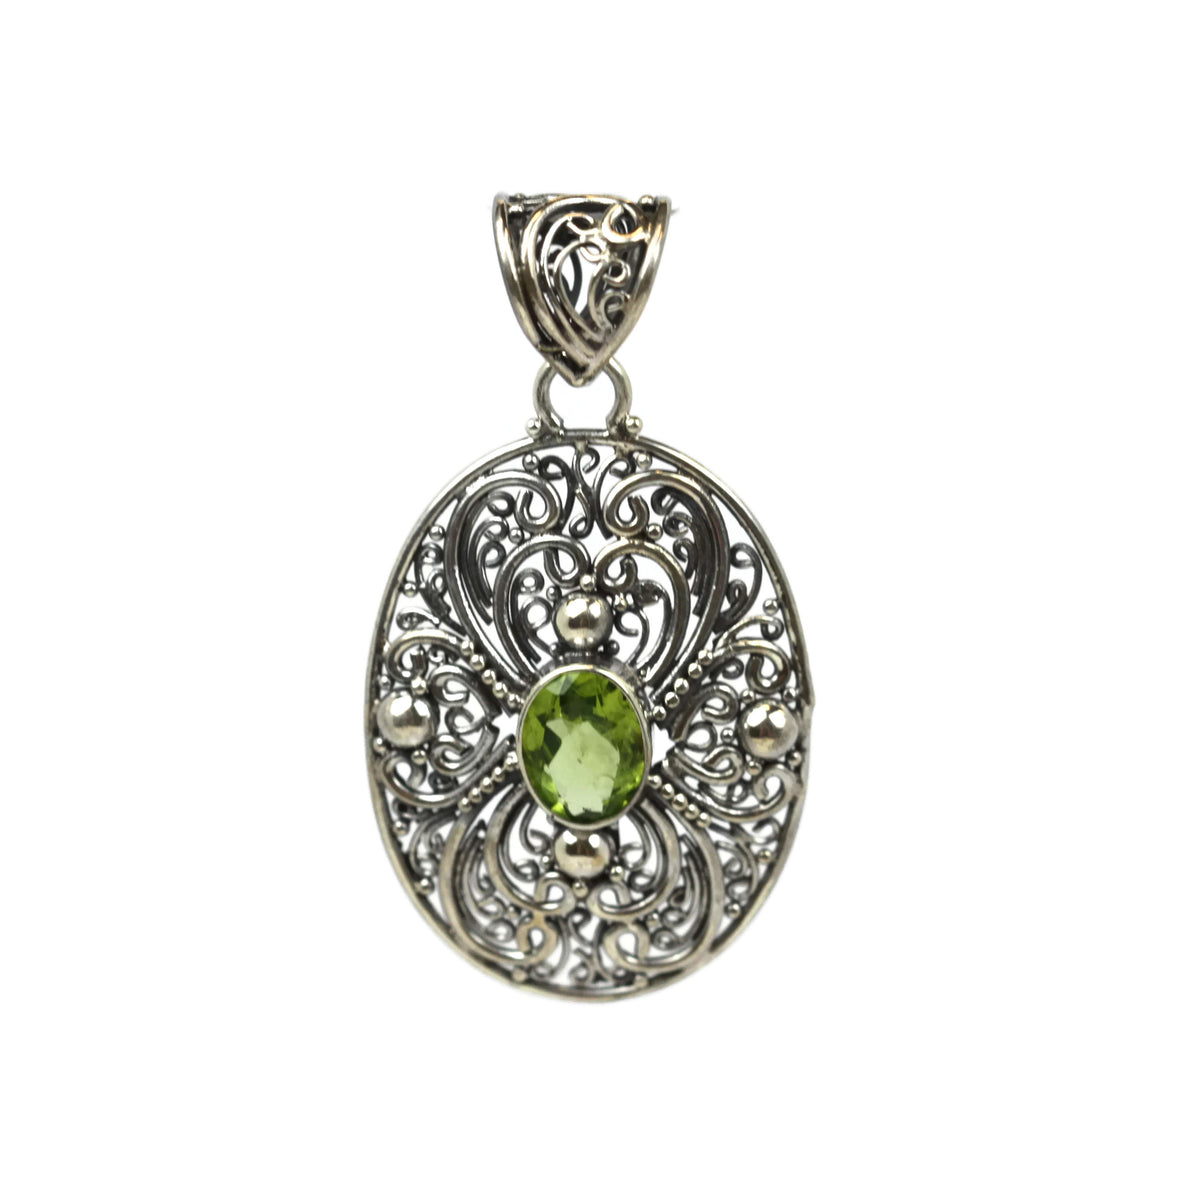 Handmade 925 Sterling Silver Antique Decorative Pendant With Oval Faceted Perdote Gemstone